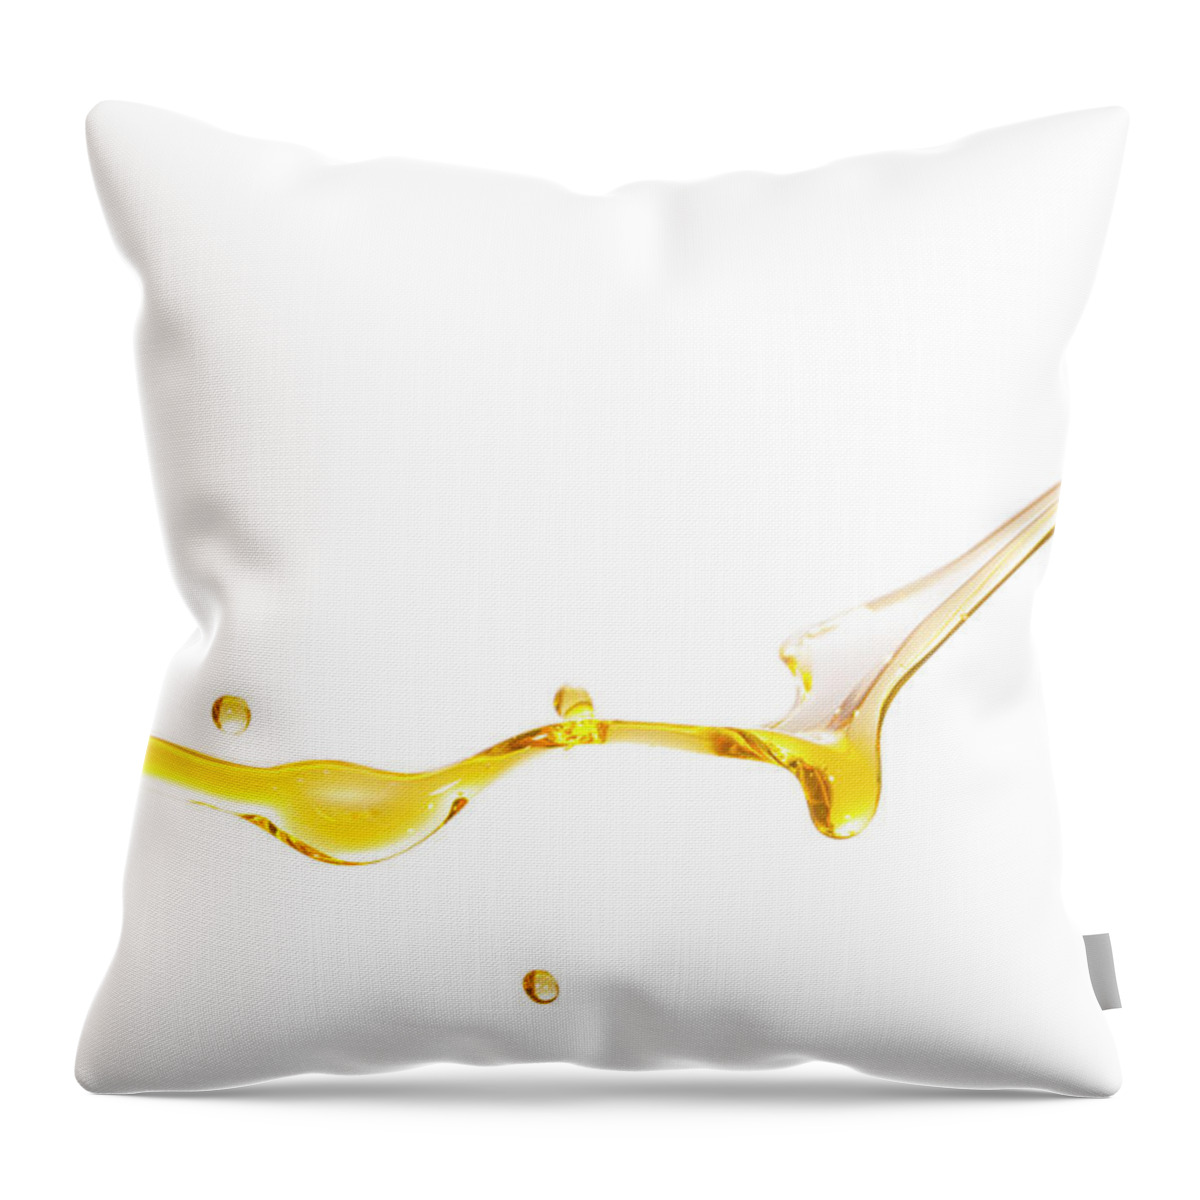 Motor Oil Throw Pillow featuring the photograph Active Oil Splash In White Background by Yaorusheng